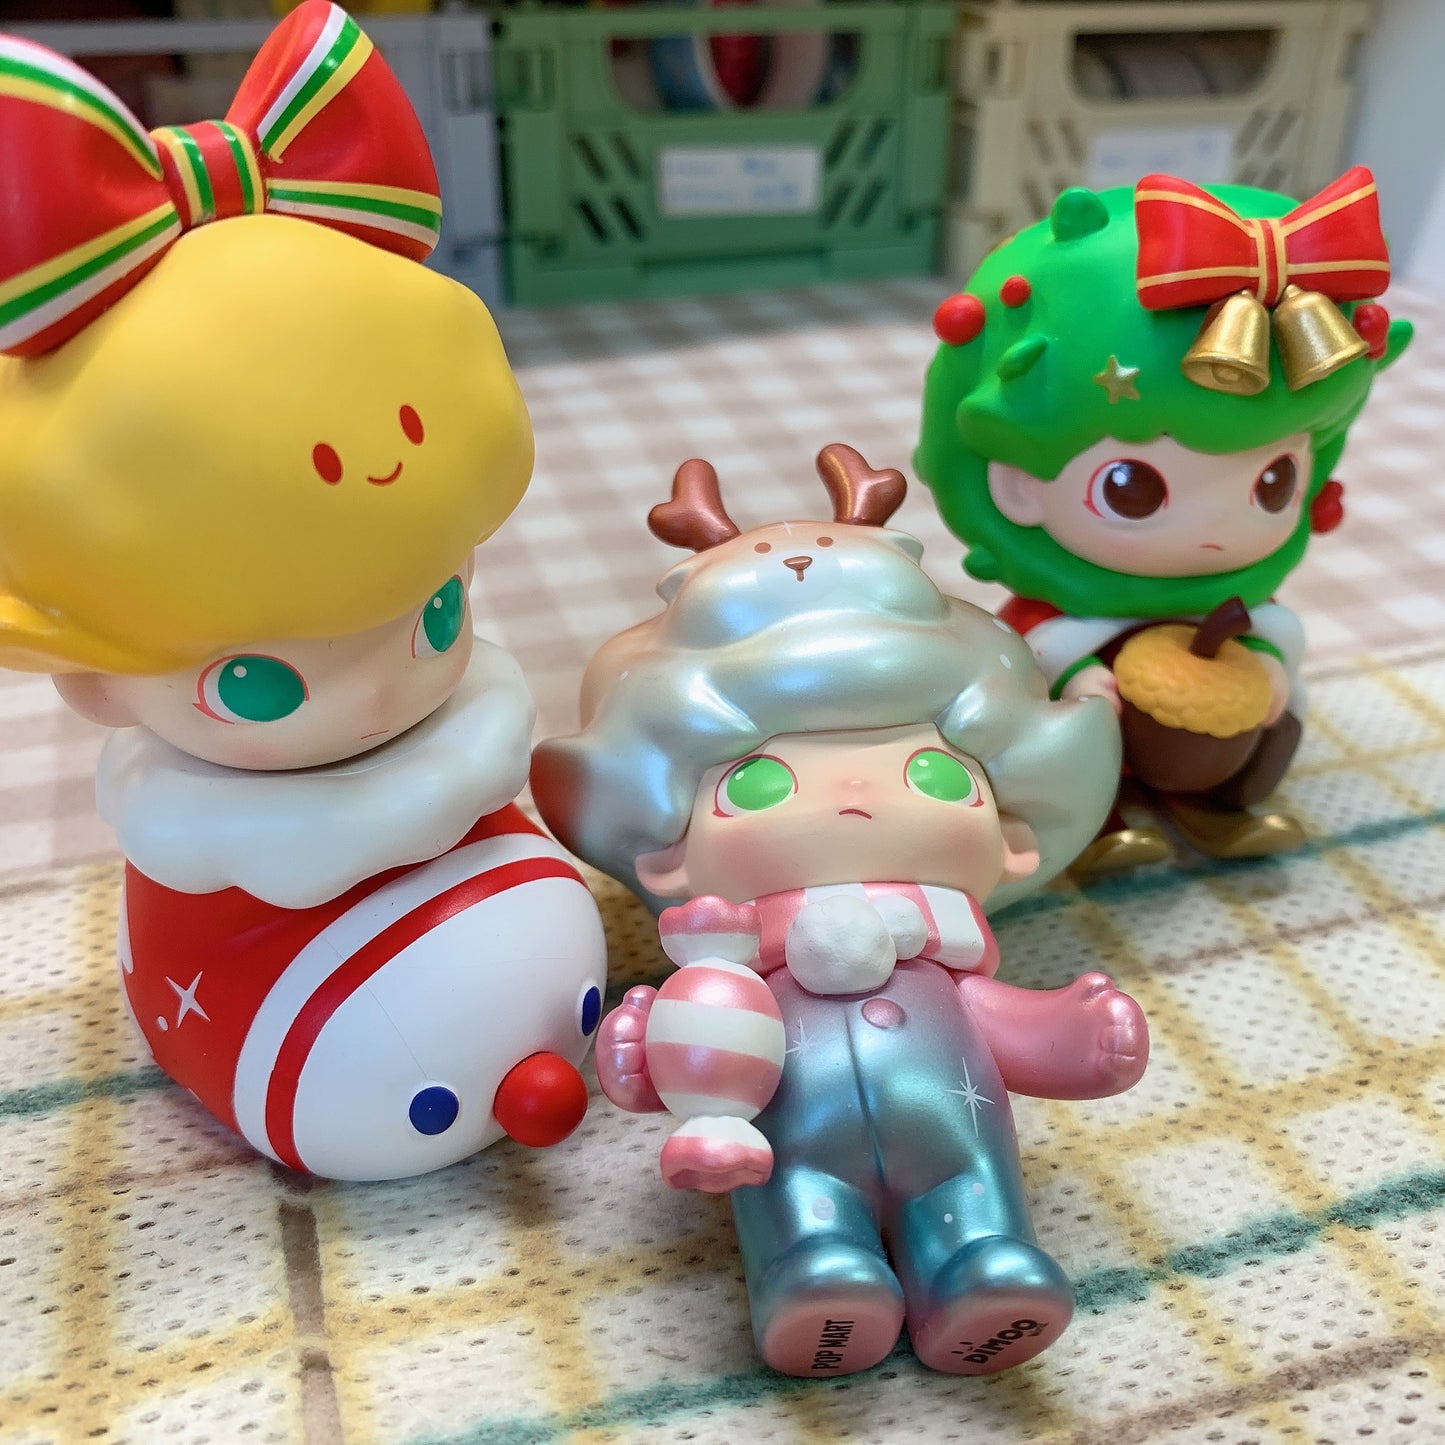 【PRELOVED and SALE 】POPMART Dimoo blind box toy Christmas series pack